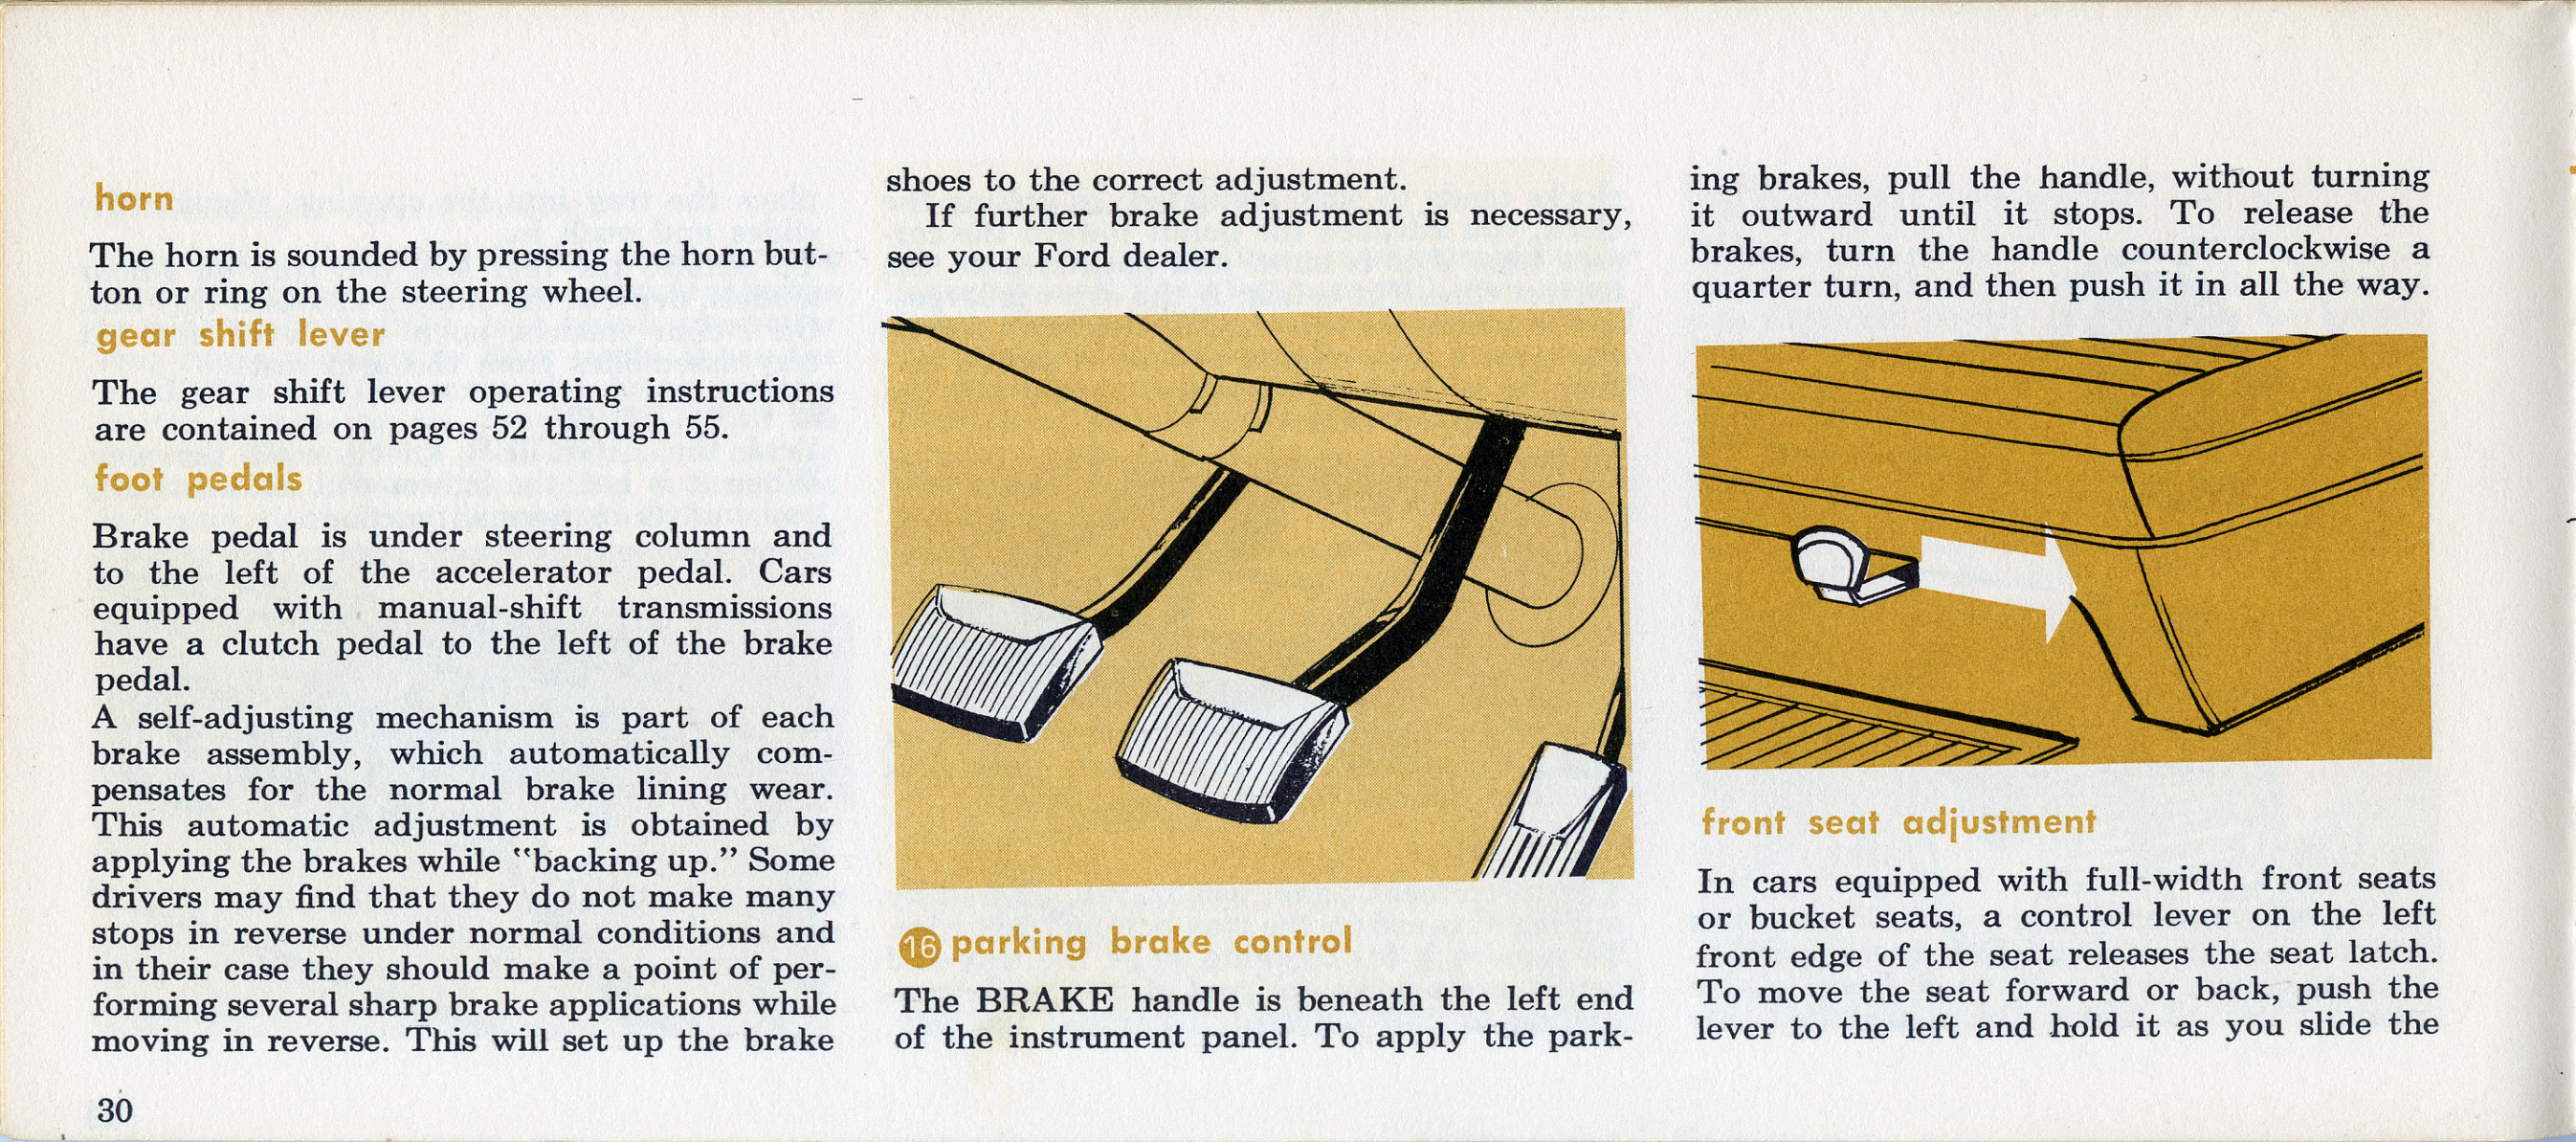 1964 Ford Falcon Owners Manual Page 25